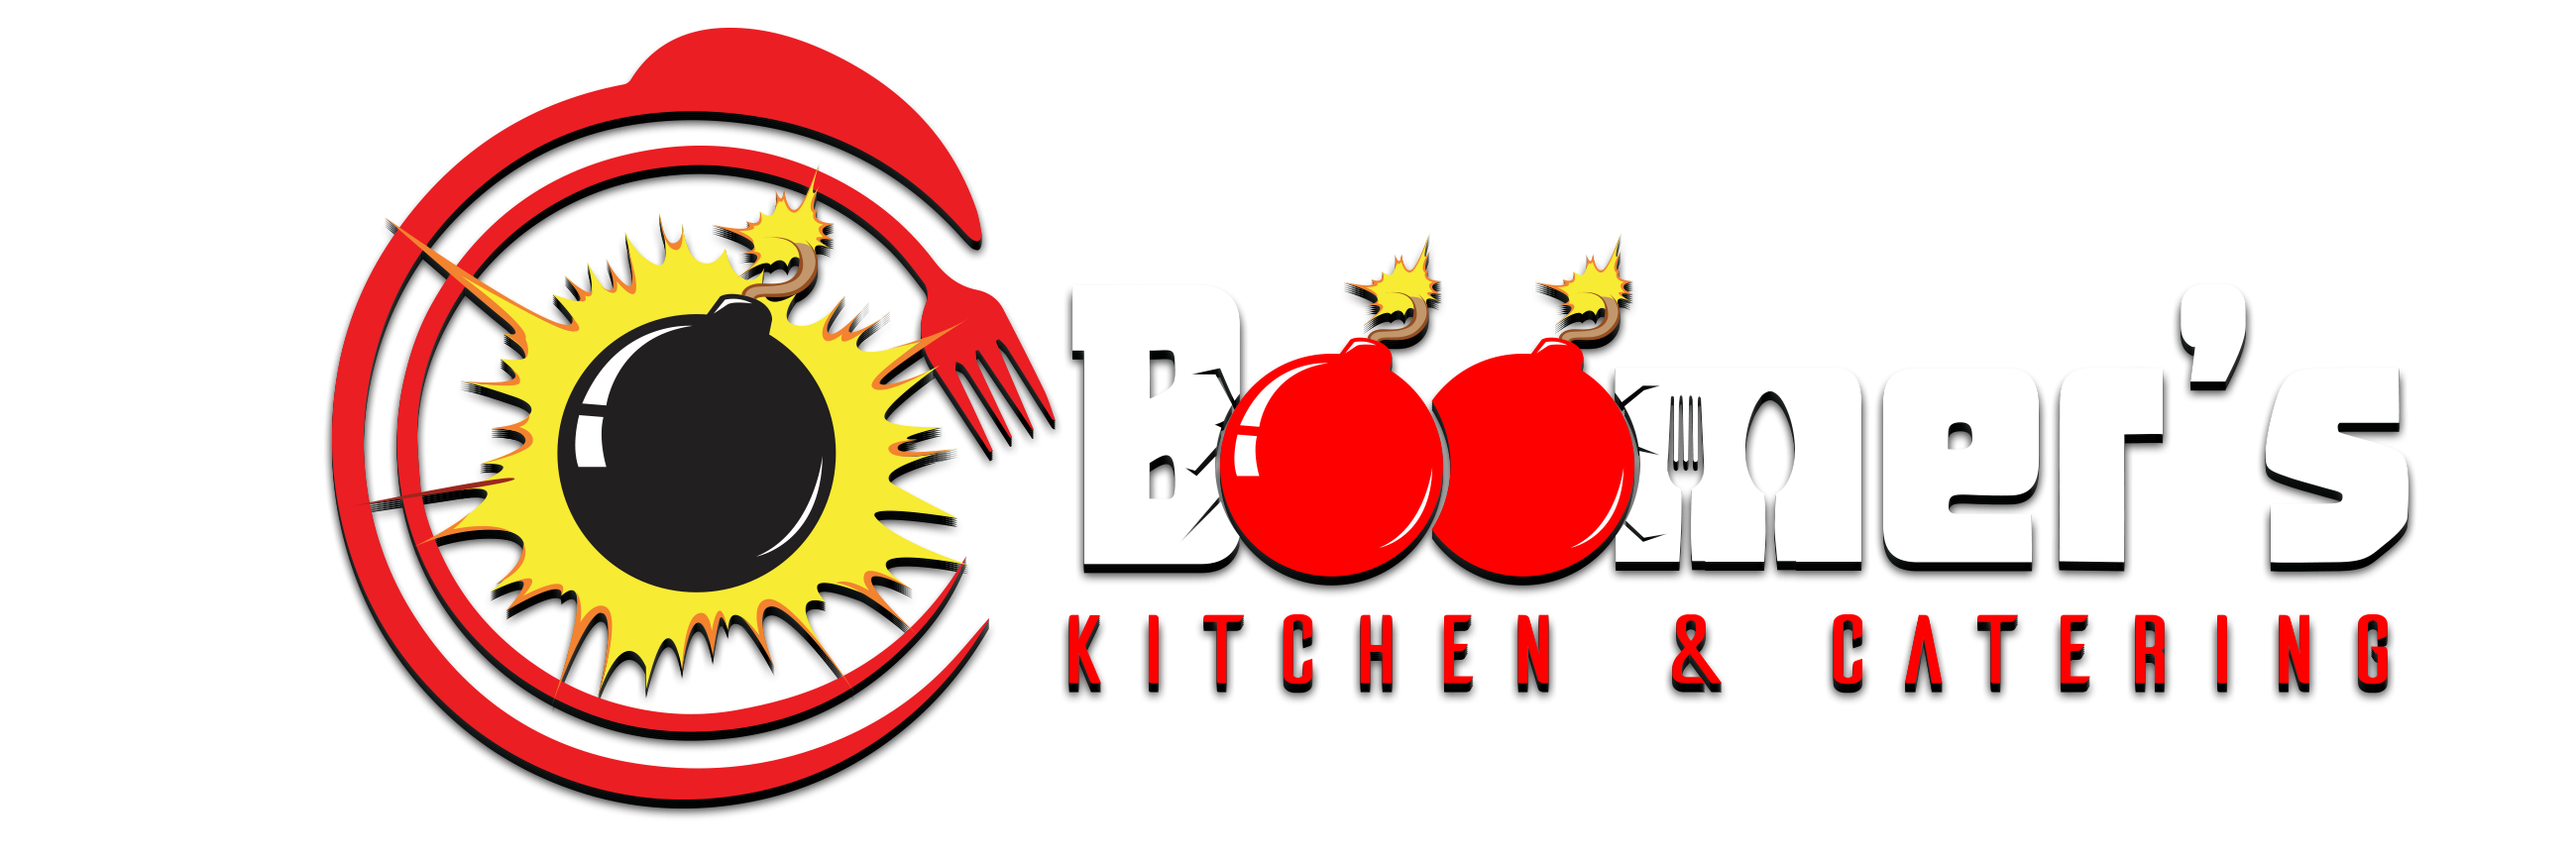 Boomer's Kitchen & Catering Logo